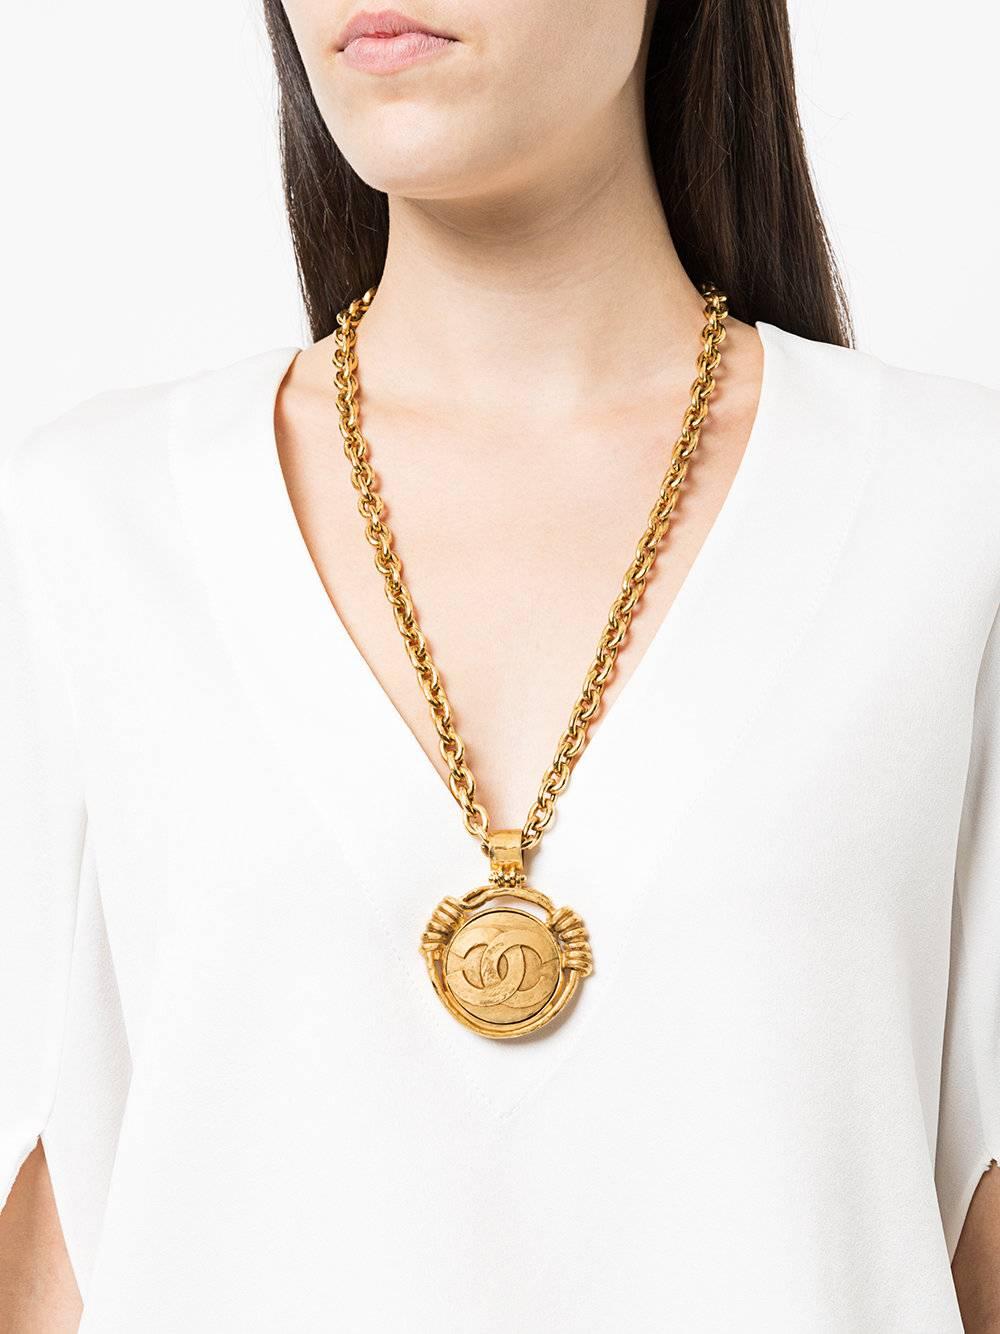 Chanel Vintage Gold Medallion Charm Reverse Mirror Evening Dangle Long Necklace 

Metal
Gold tone
Glass
Lobster closure
Made in France
Charm diameter 2